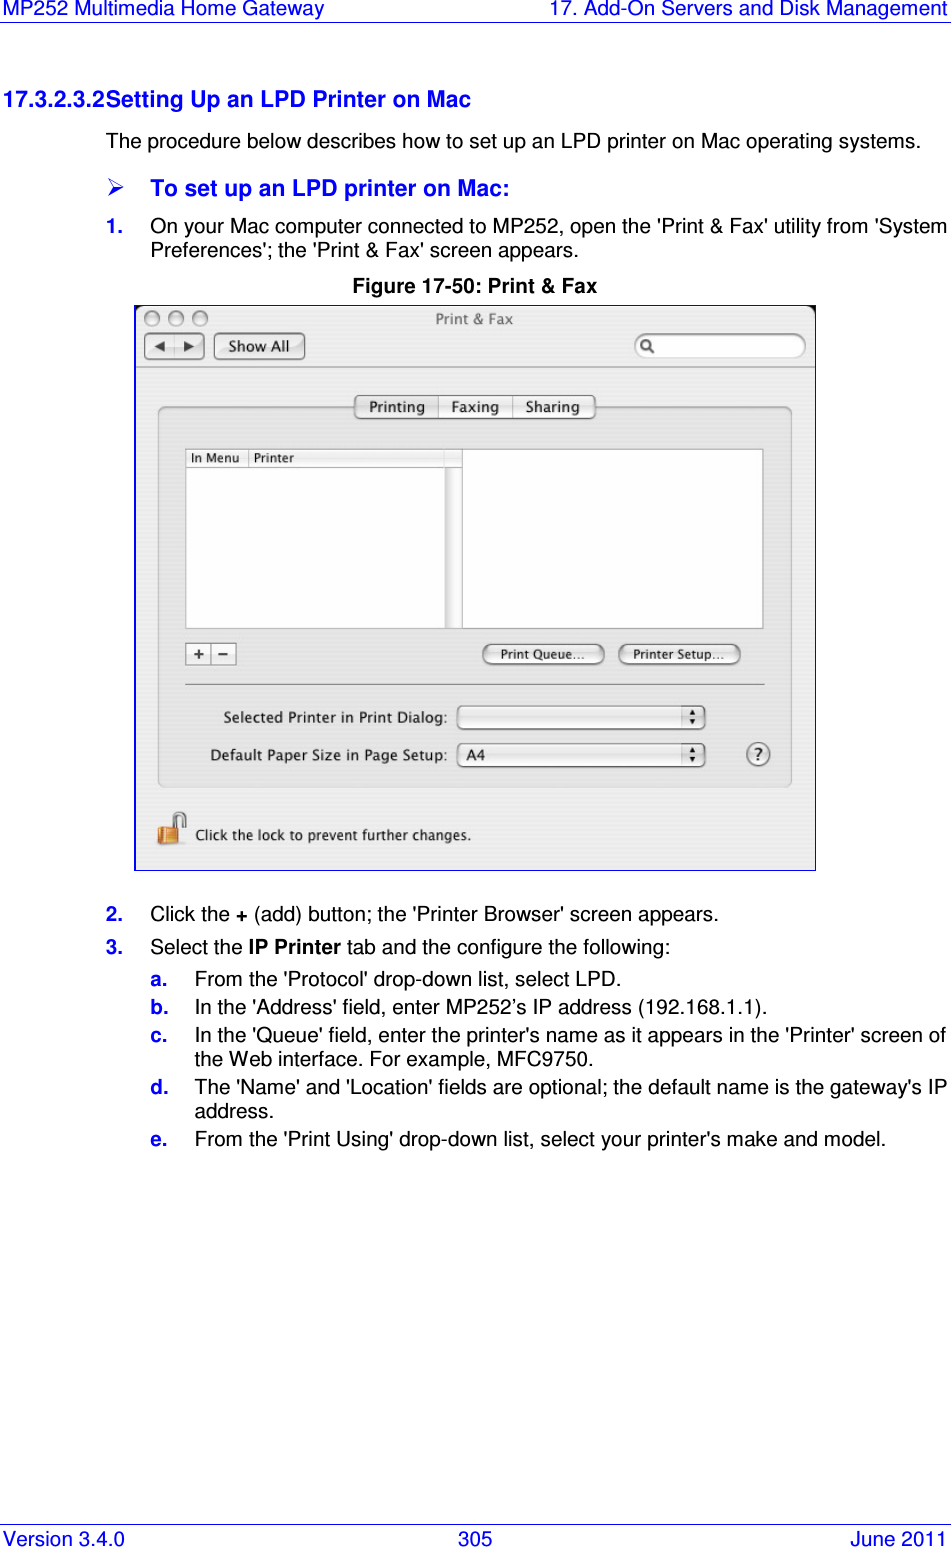 MP252 Multimedia Home Gateway  17. Add-On Servers and Disk Management Version 3.4.0  305  June 2011 17.3.2.3.2 Setting Up an LPD Printer on Mac The procedure below describes how to set up an LPD printer on Mac operating systems.  To set up an LPD printer on Mac: 1.  On your Mac computer connected to MP252, open the &apos;Print &amp; Fax&apos; utility from &apos;System Preferences&apos;; the &apos;Print &amp; Fax&apos; screen appears. Figure 17-50: Print &amp; Fax  2.  Click the + (add) button; the &apos;Printer Browser&apos; screen appears.  3.  Select the IP Printer tab and the configure the following: a.  From the &apos;Protocol&apos; drop-down list, select LPD. b.  In the &apos;Address&apos; field, enter MP252’s IP address (192.168.1.1). c.  In the &apos;Queue&apos; field, enter the printer&apos;s name as it appears in the &apos;Printer&apos; screen of the Web interface. For example, MFC9750. d.  The &apos;Name&apos; and &apos;Location&apos; fields are optional; the default name is the gateway&apos;s IP address. e.  From the &apos;Print Using&apos; drop-down list, select your printer&apos;s make and model. 